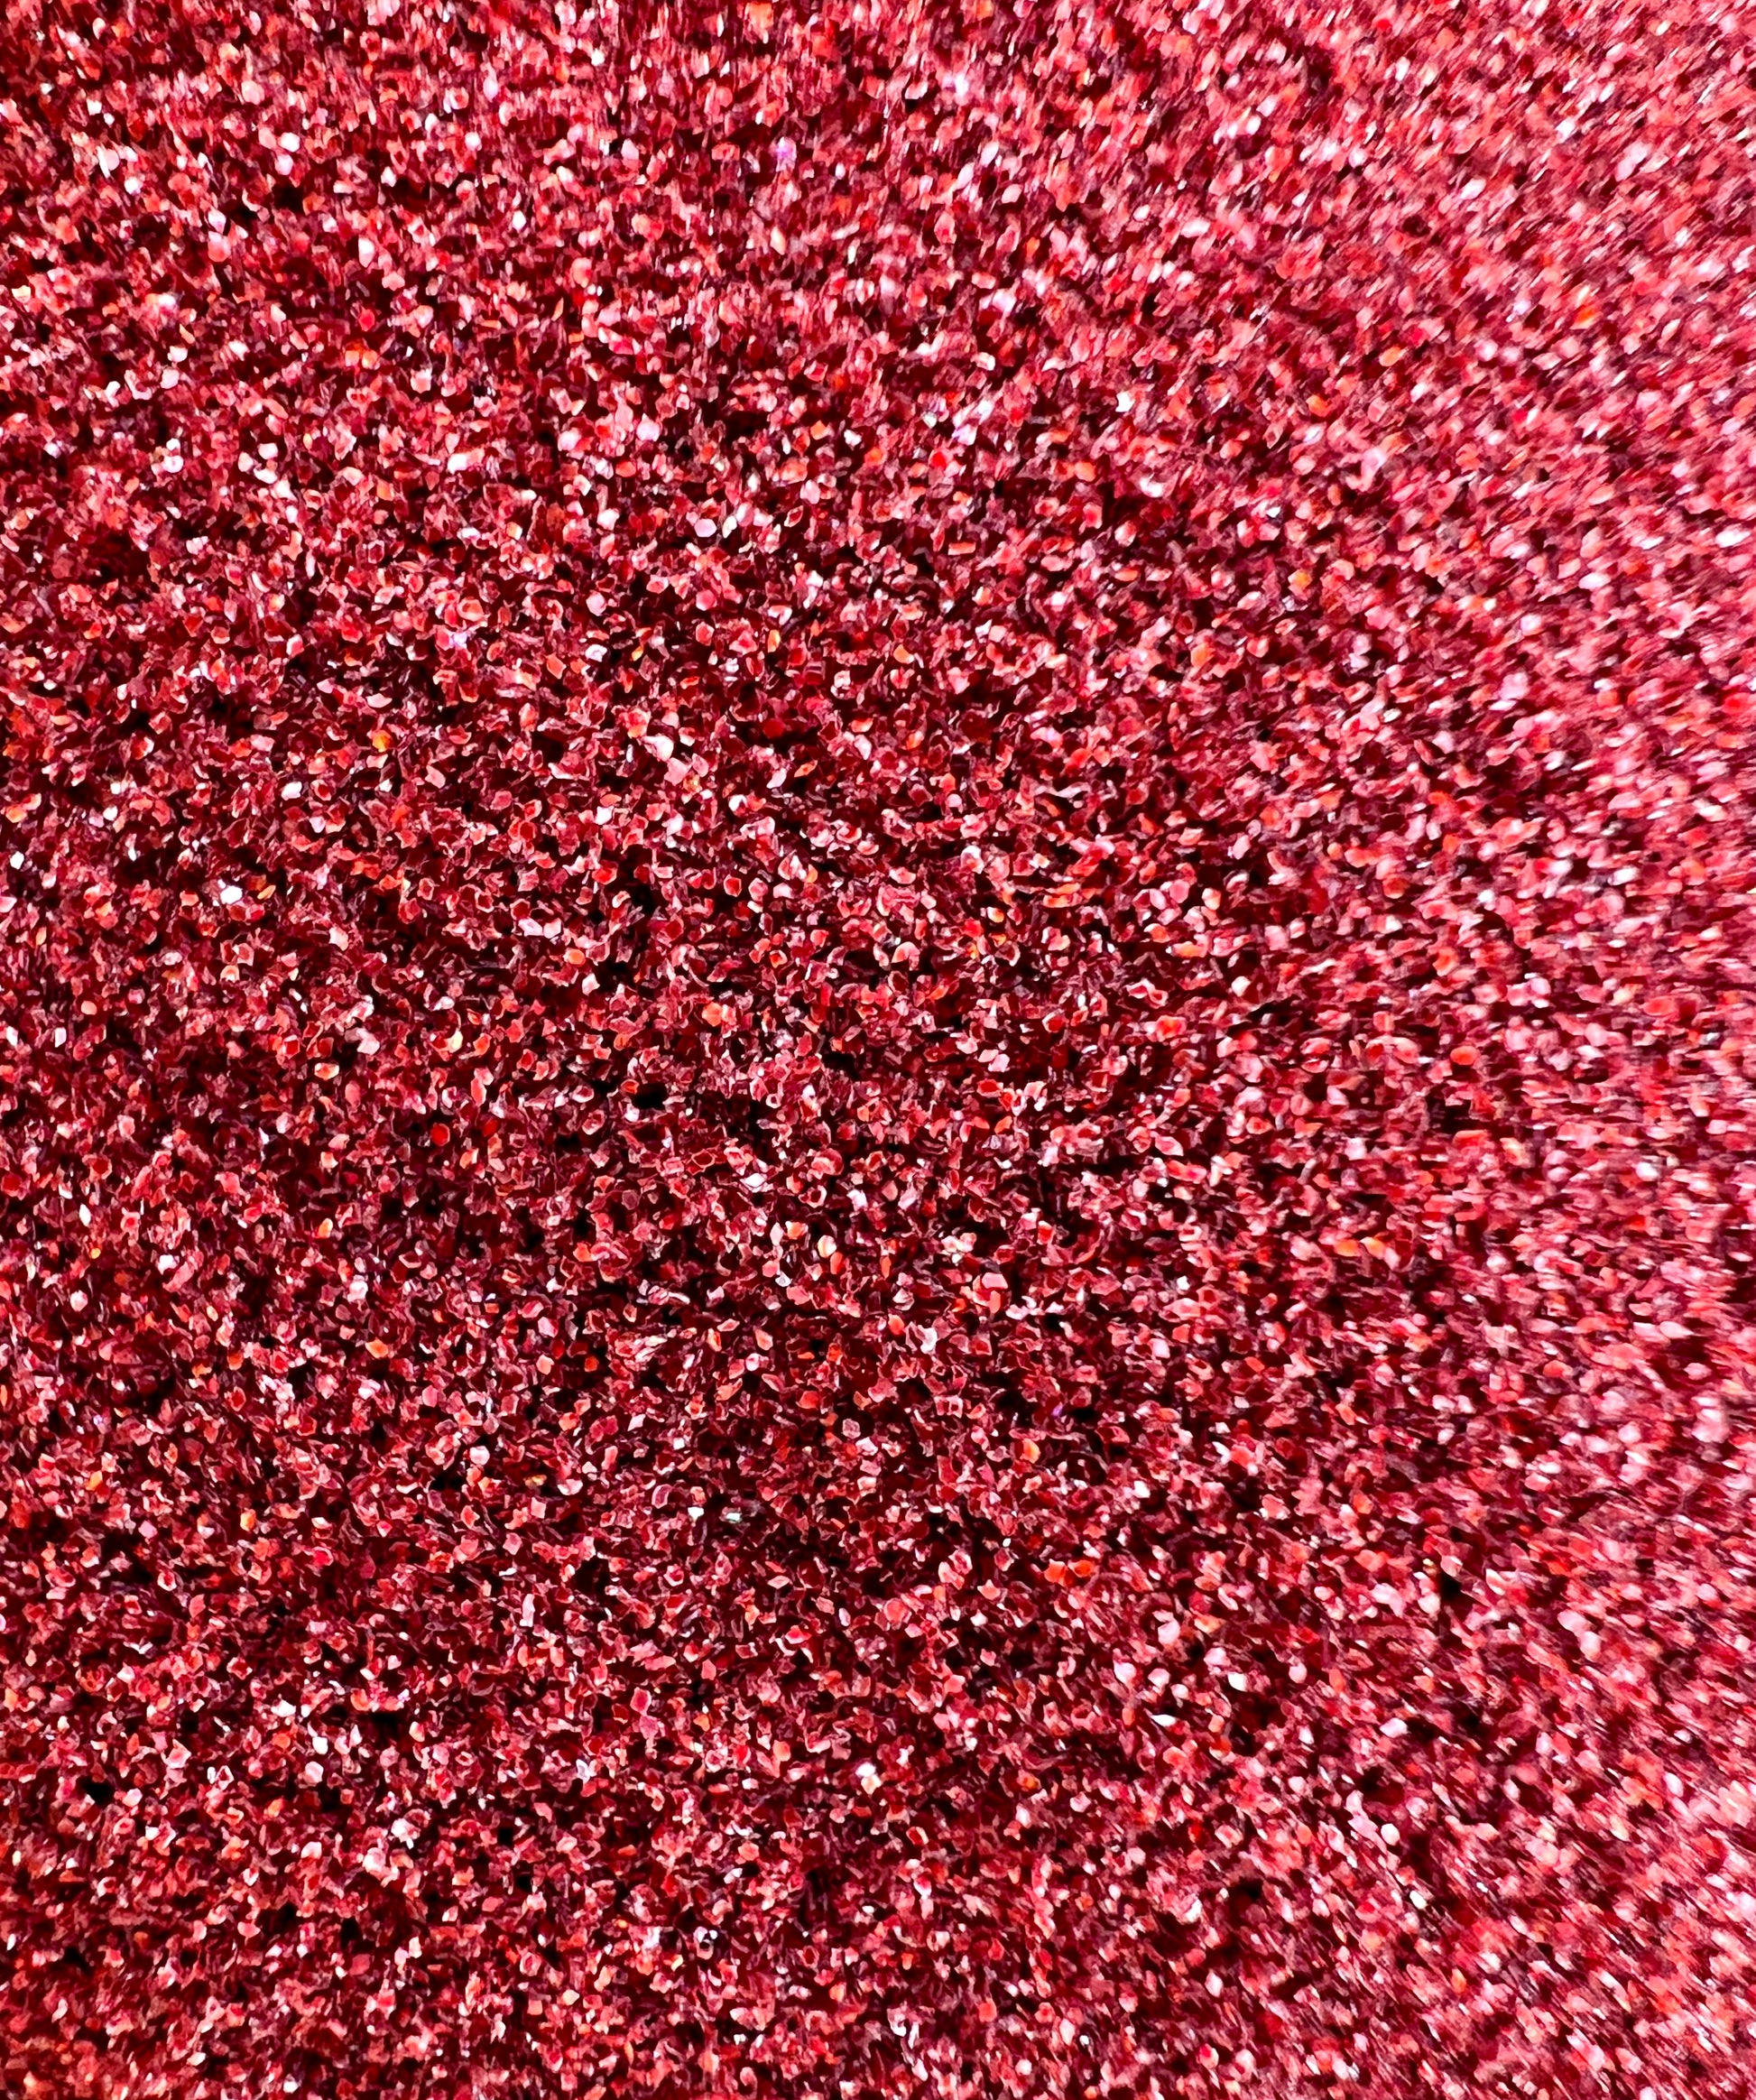 Rocky Ultra Fine Red Holographic Biodegradable Glitter